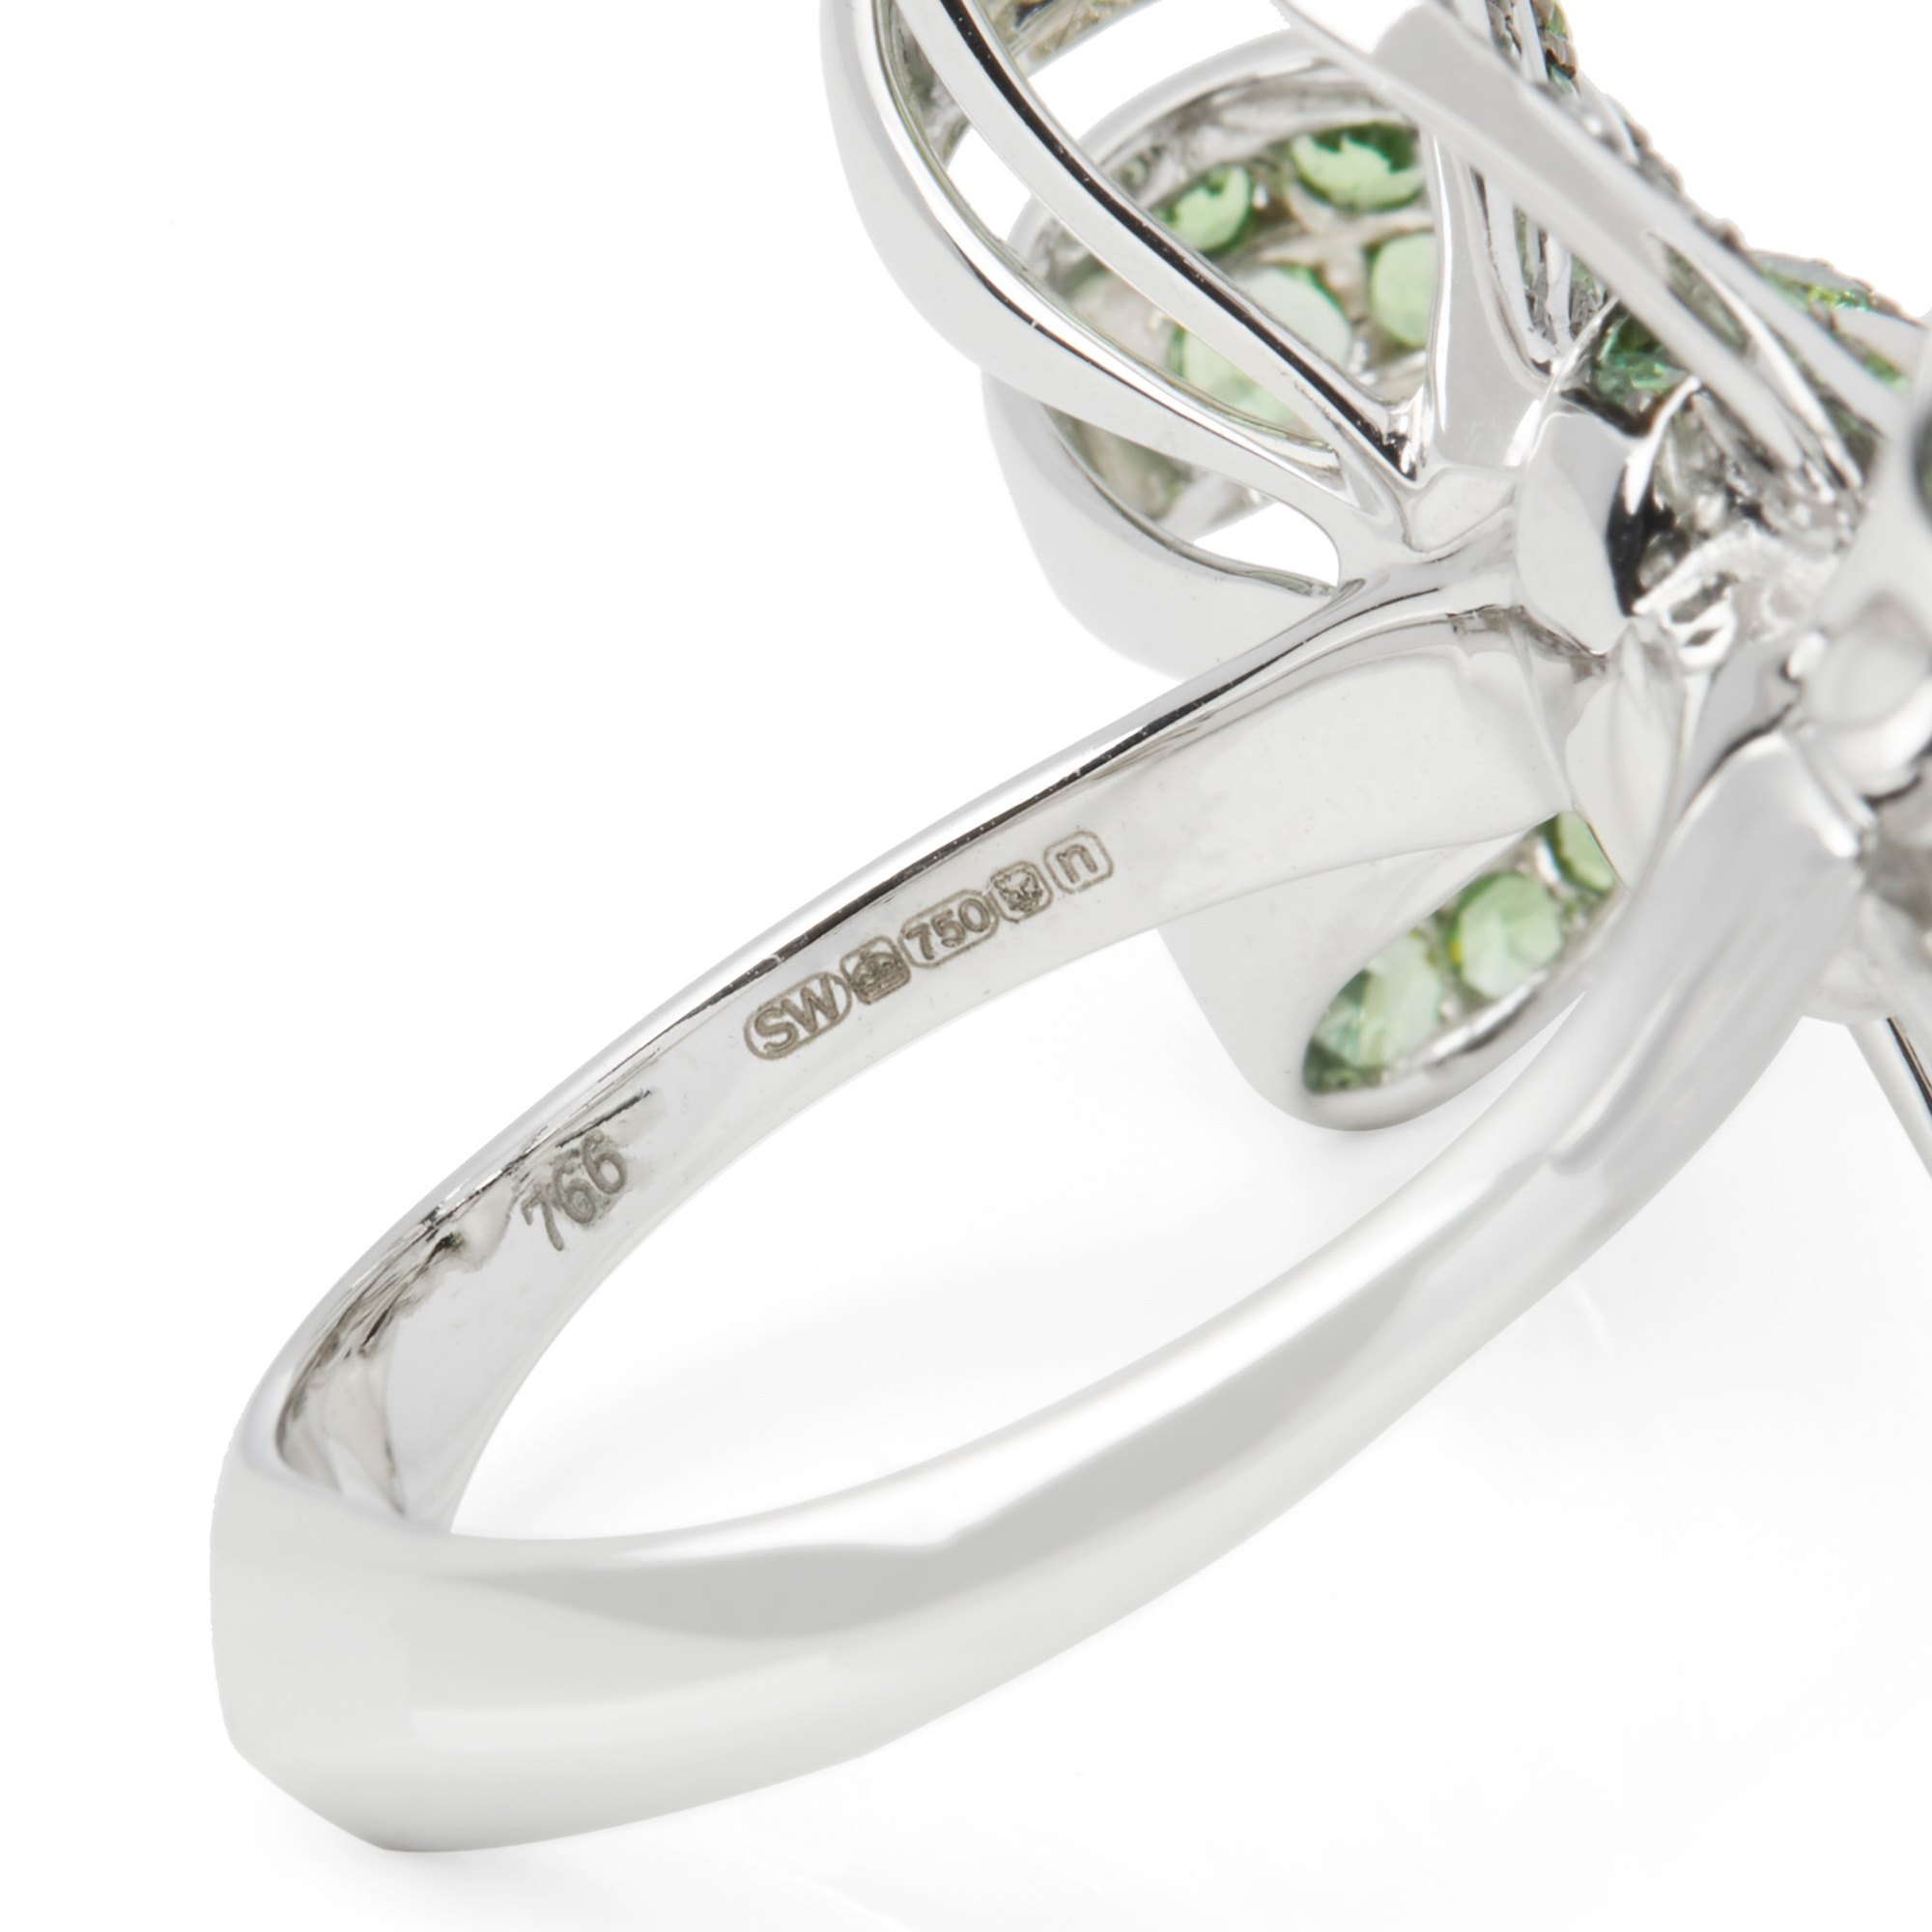 Stephen Webster Forget me Not 18ct White Gold Pave Tsavorite Bow Ring